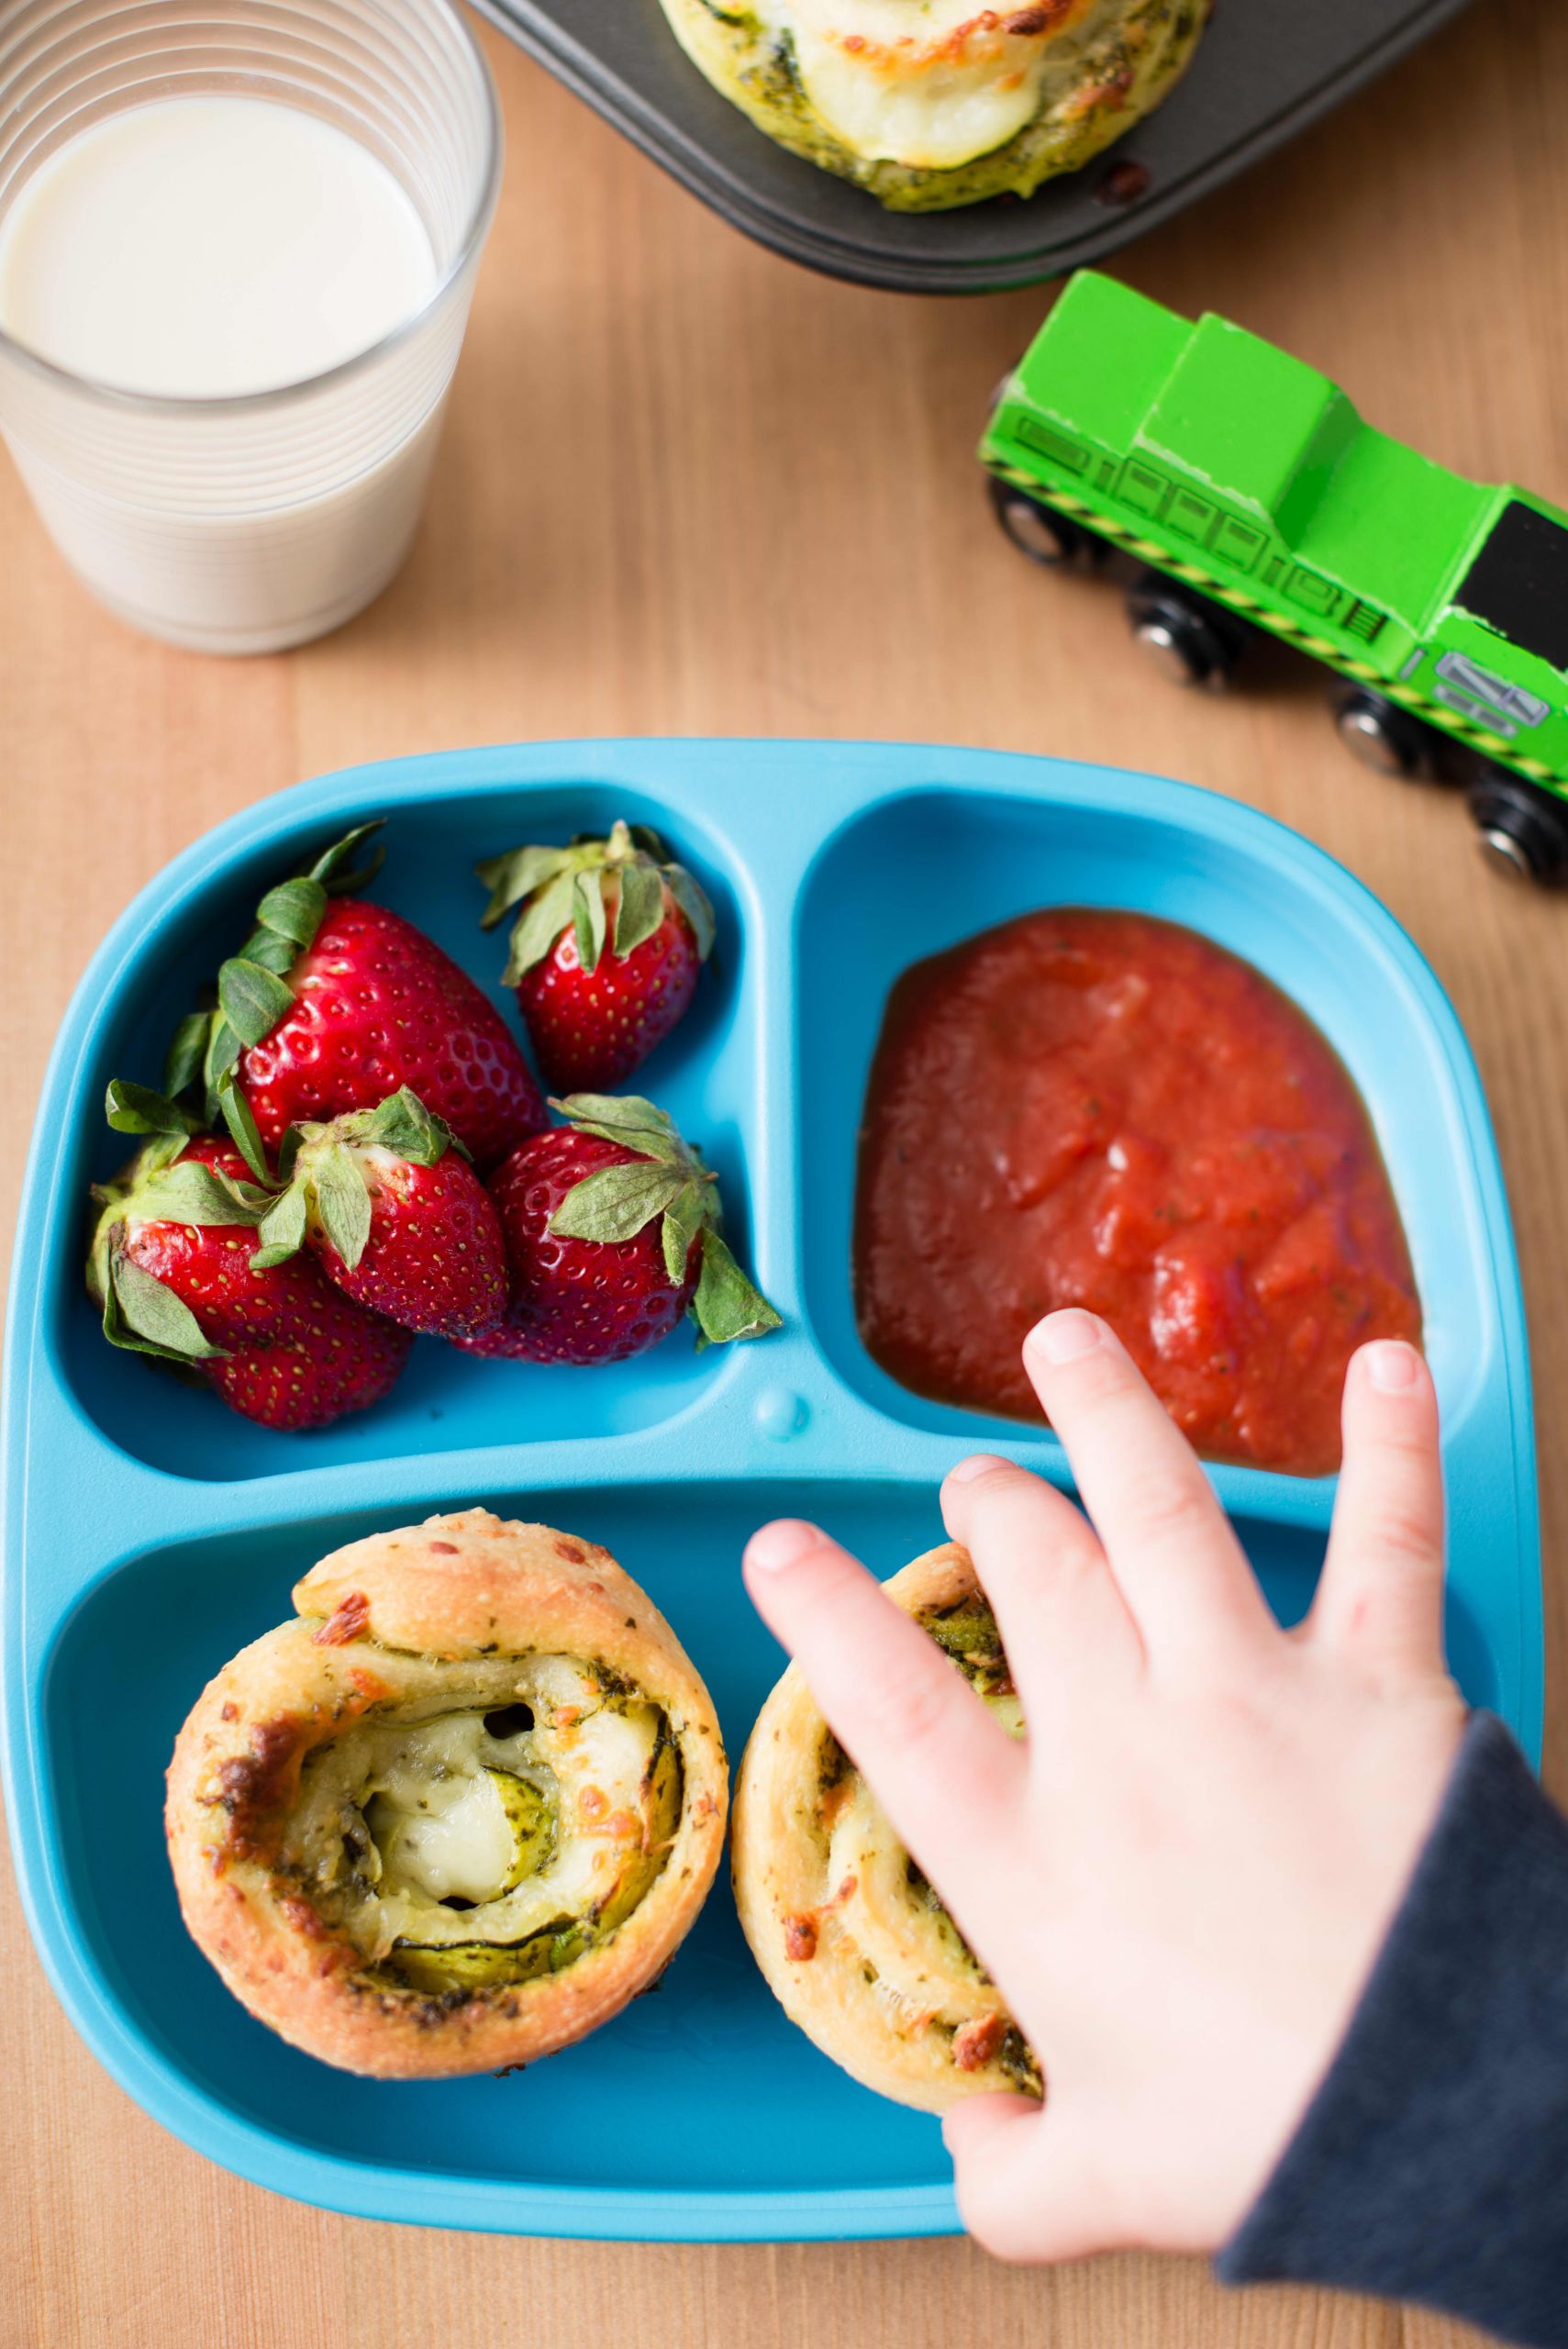 Our Most Shared Easy Dinner Ideas for Kids
 Ever